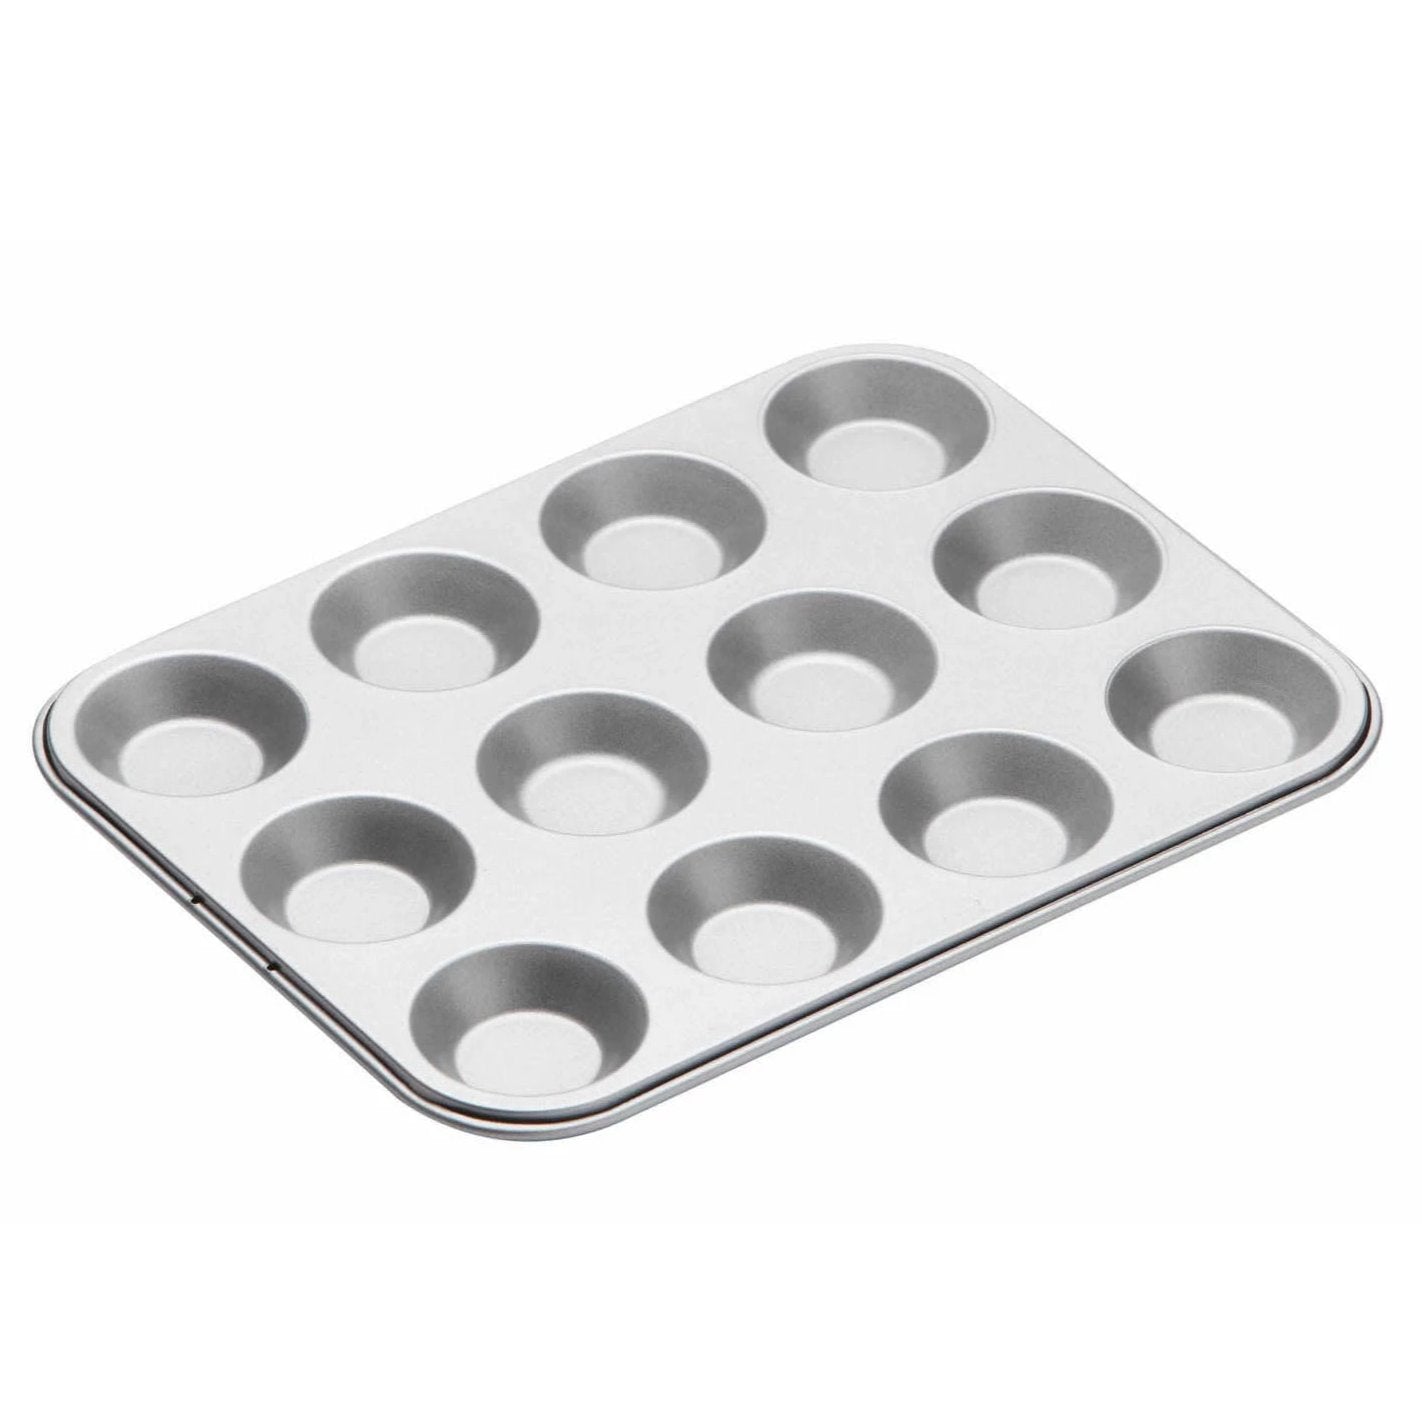 KitchenCraft Non-Stick Twelve Hole Shallow Pan - Ideal for Mince Pies - The Cooks Cupboard Ltd